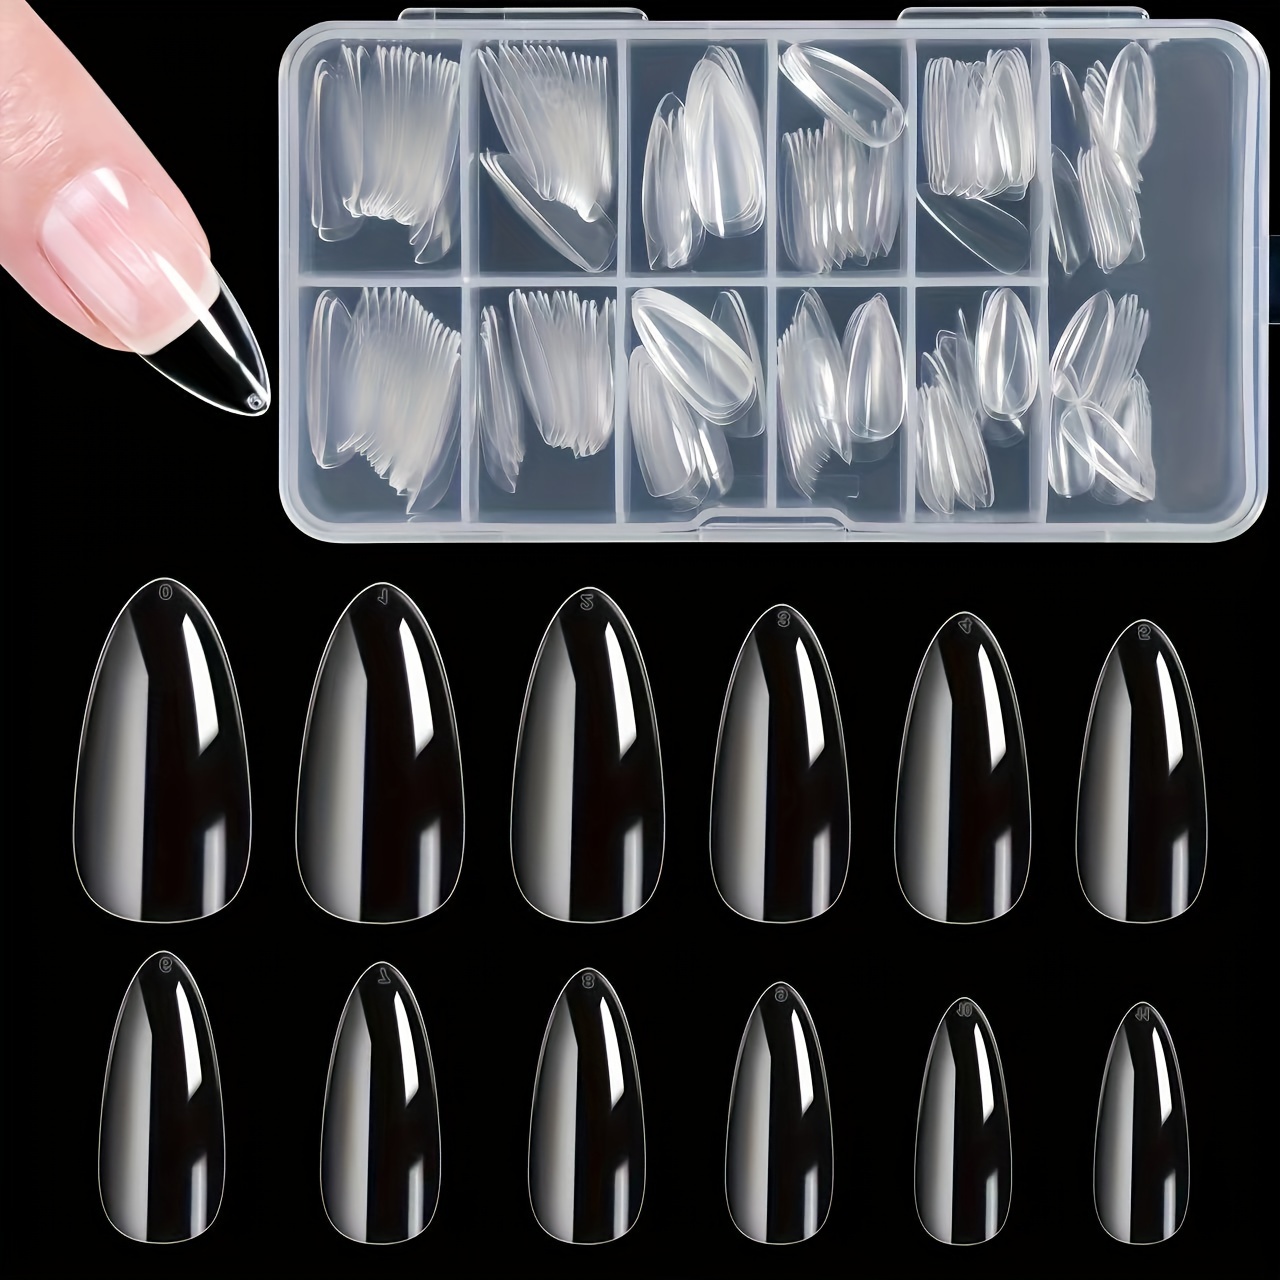 

240 Pcs Almond Shaped Clear Soft Gel Nail Tips, Short Full Cover Press-on Artificial False Nails For Diy Home Salon Use